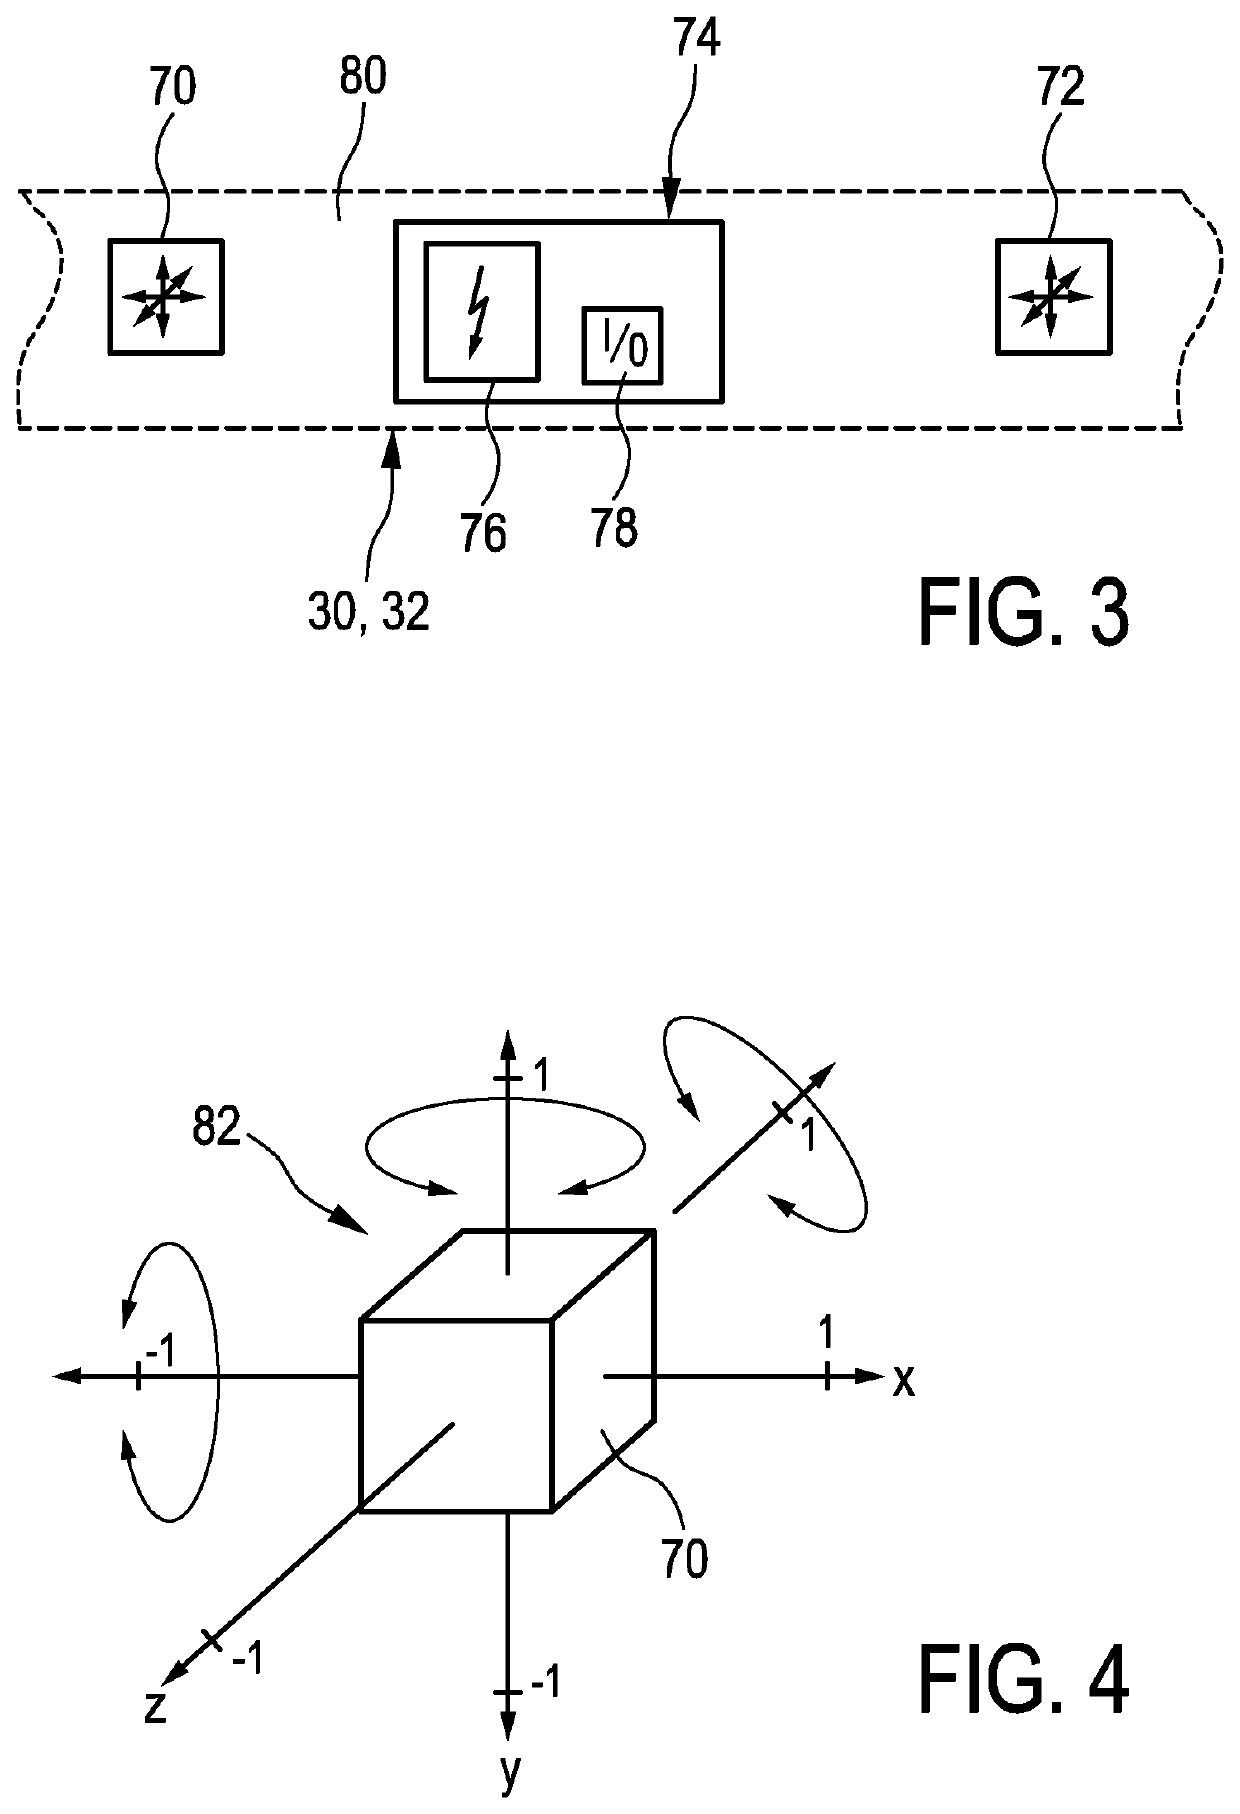 Pregnancy monitoring system and method